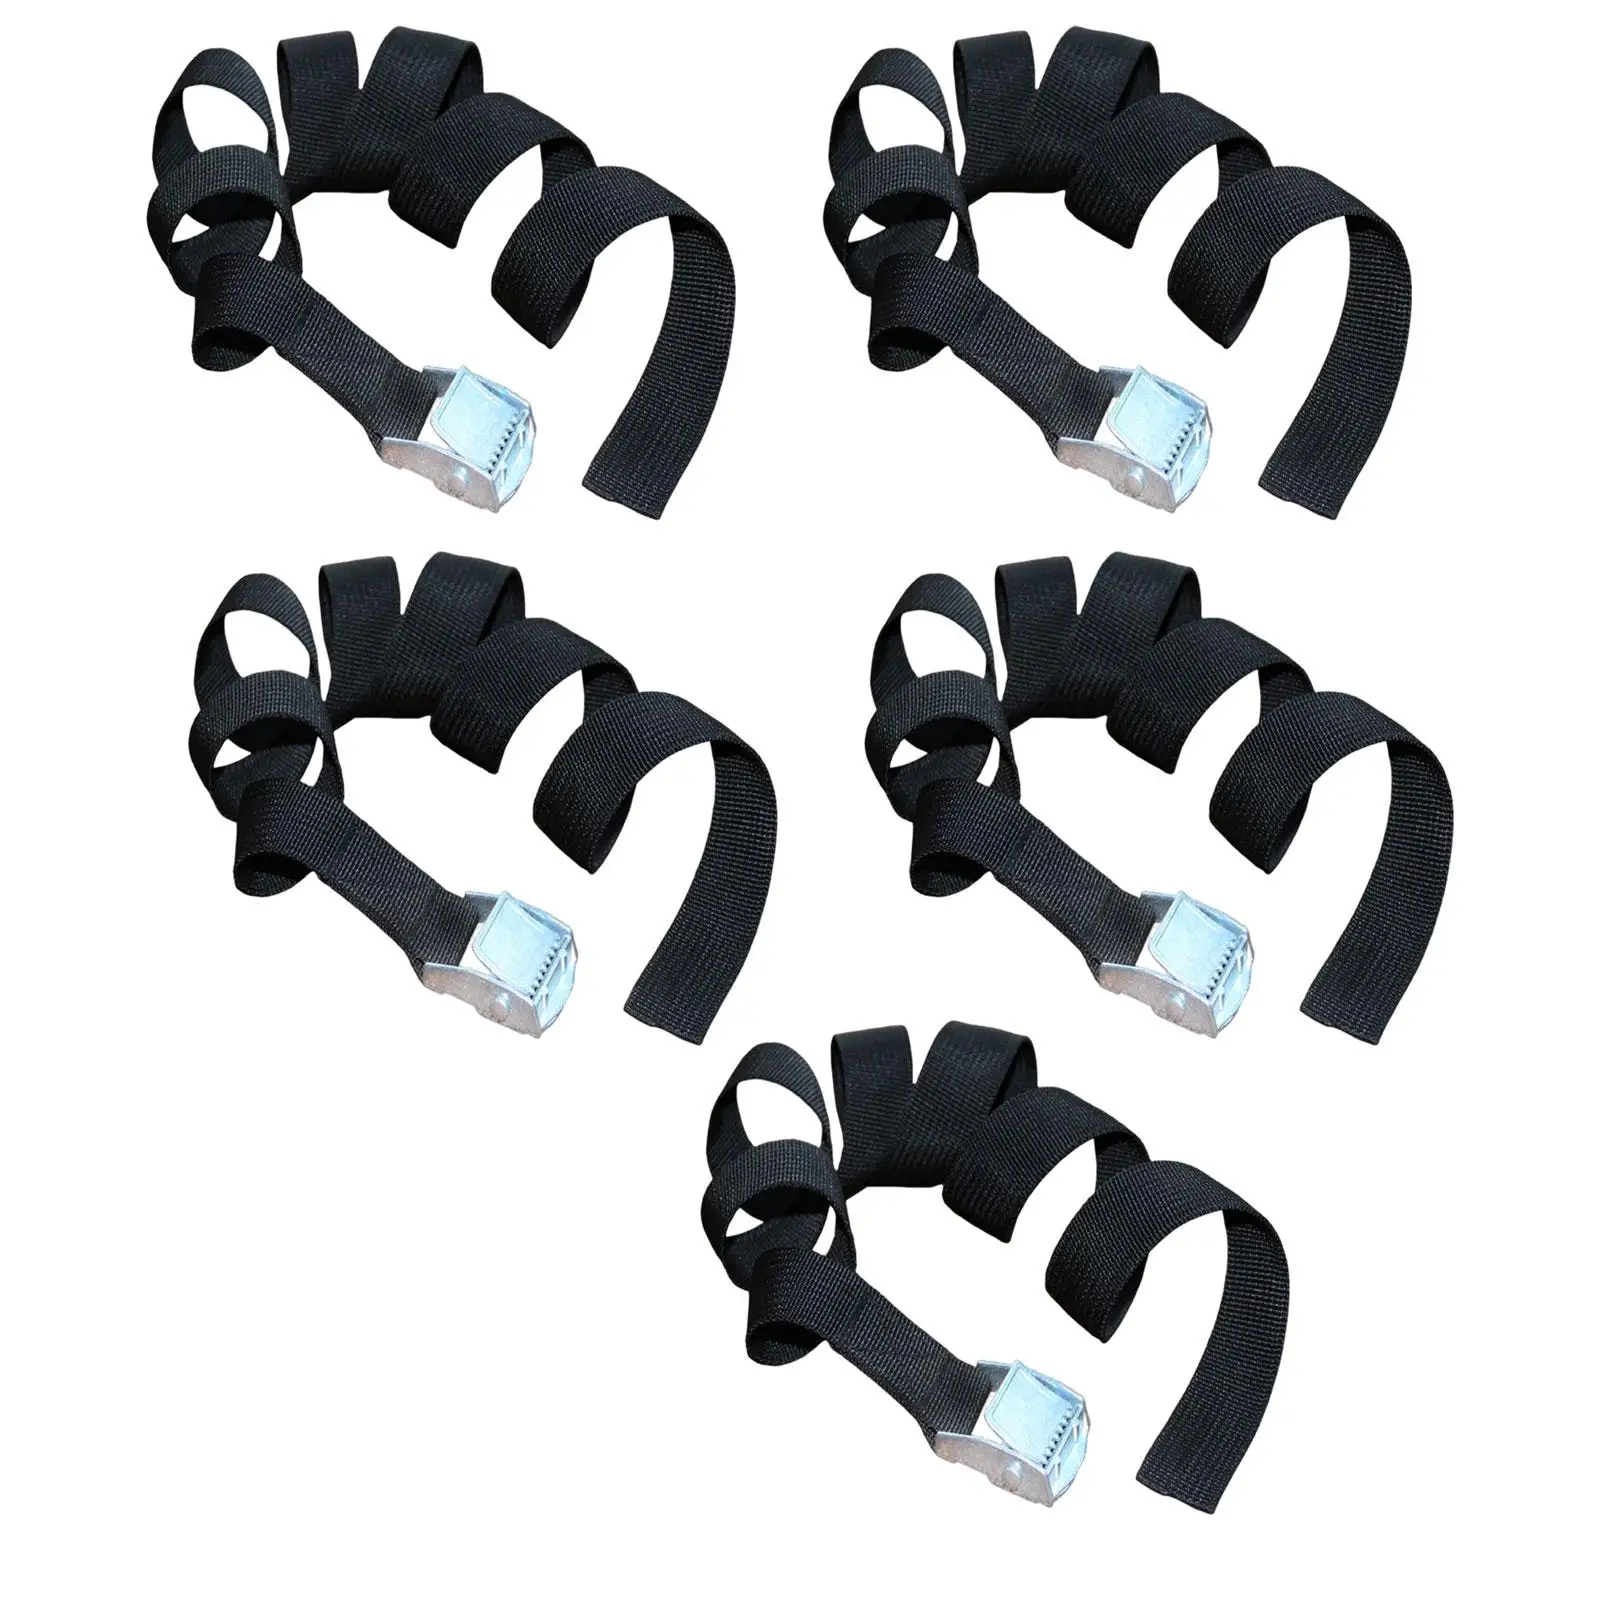 5 Pieces Luggage Strap with Zinc Alloy Lock Buckle for Surfboard Fixing